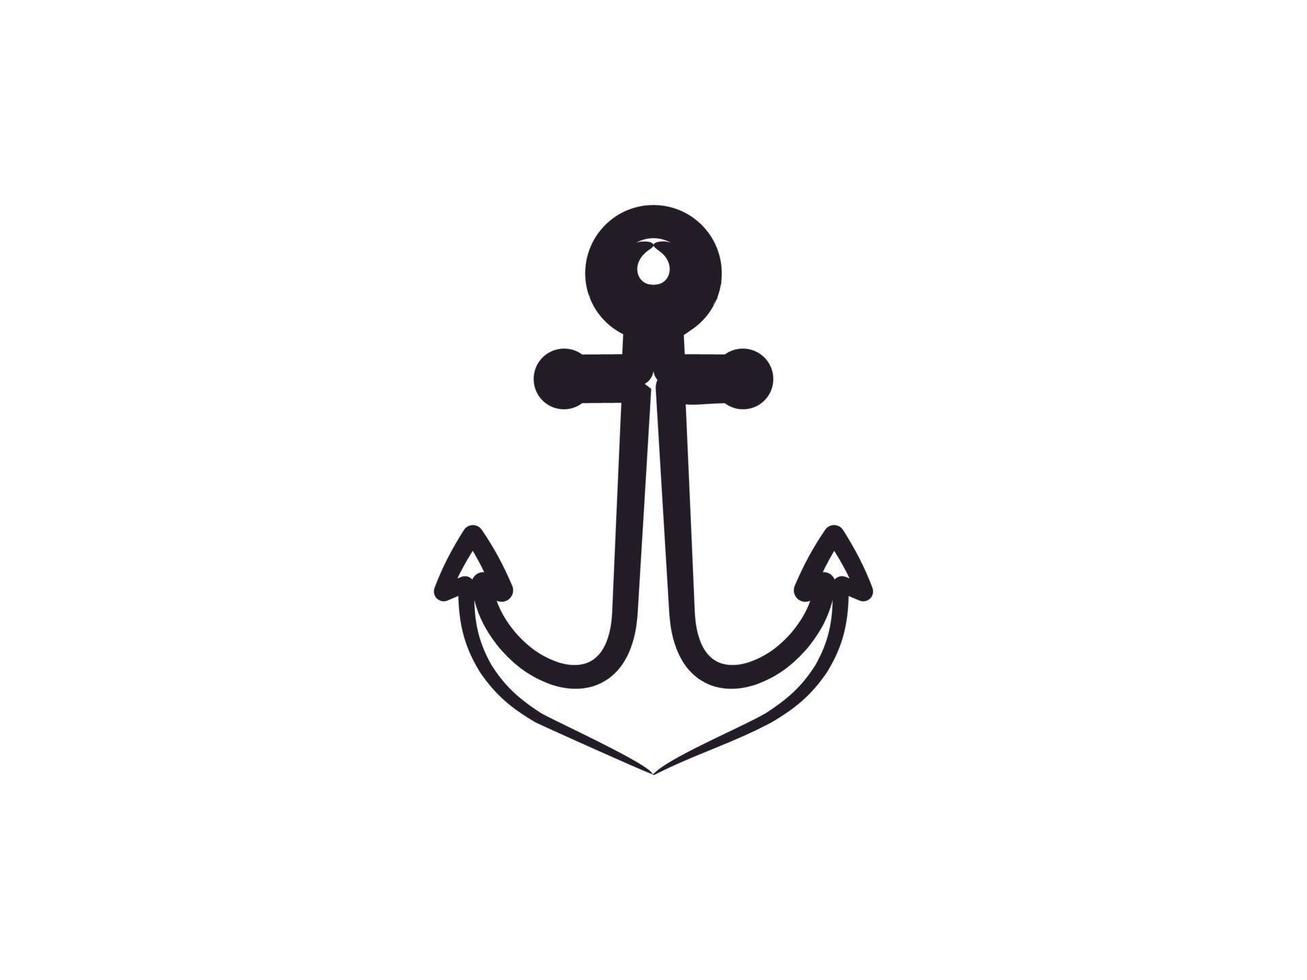 Anchor Rustic Hand Drawn Vintage Retro Hipster simple logo design for boat navy nautical ship transport vector